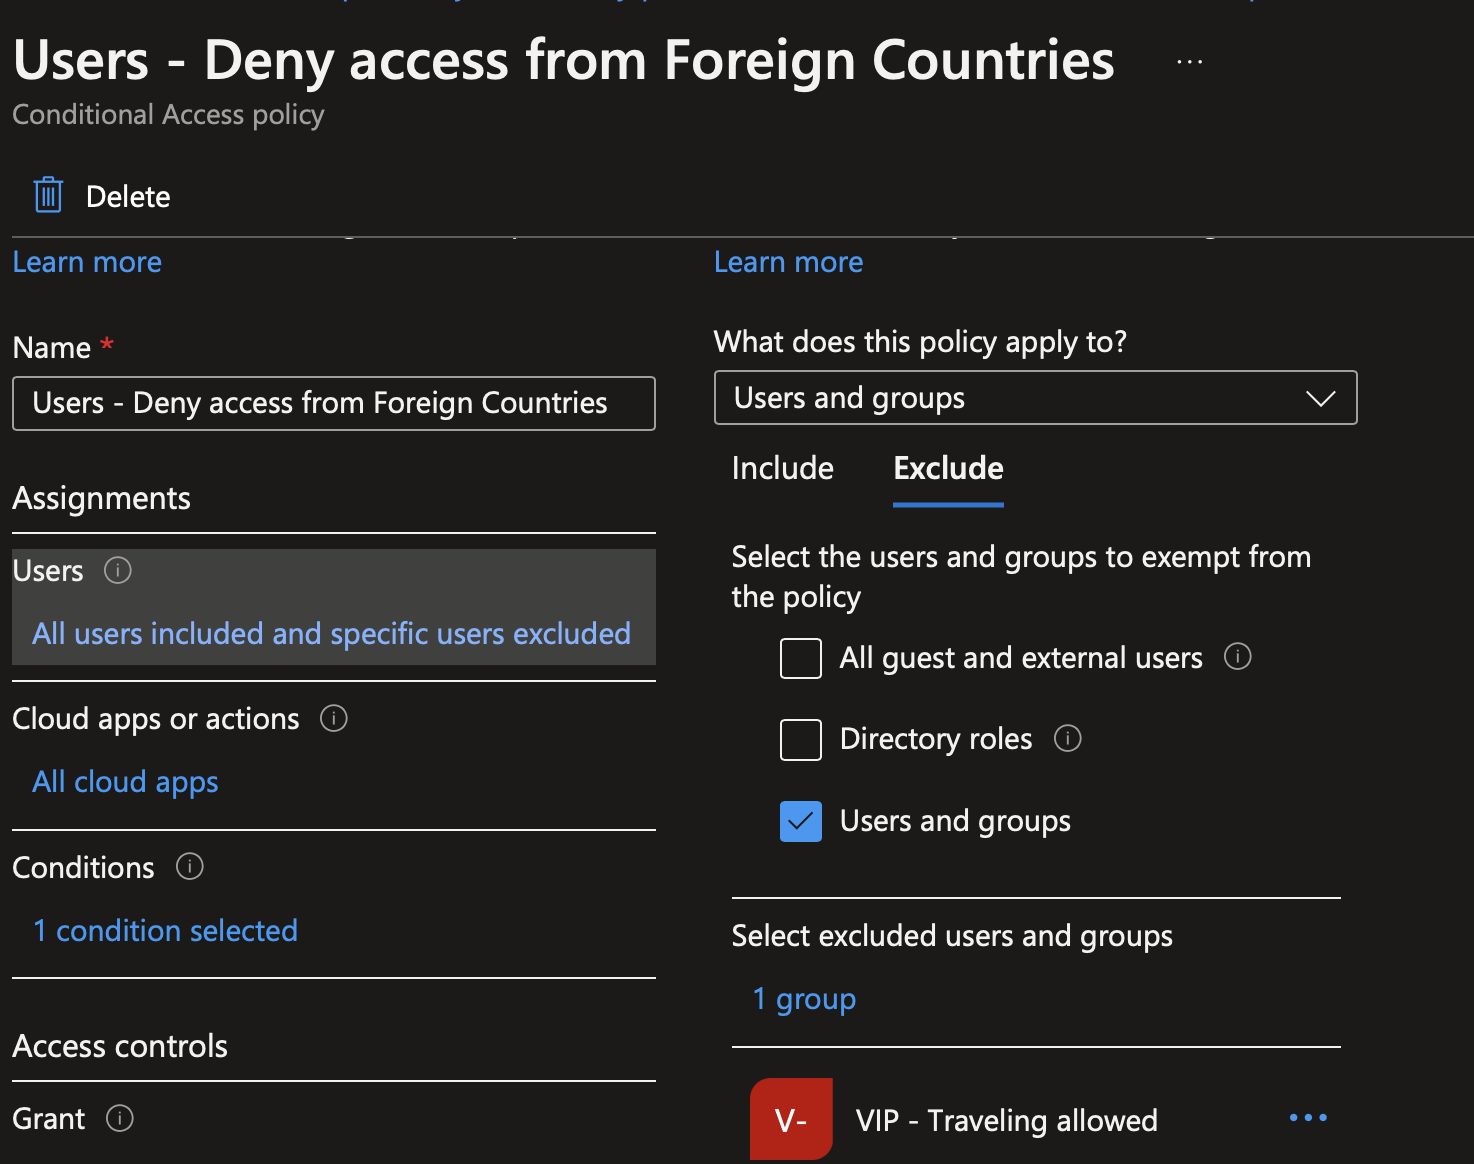 Edit the conditional access